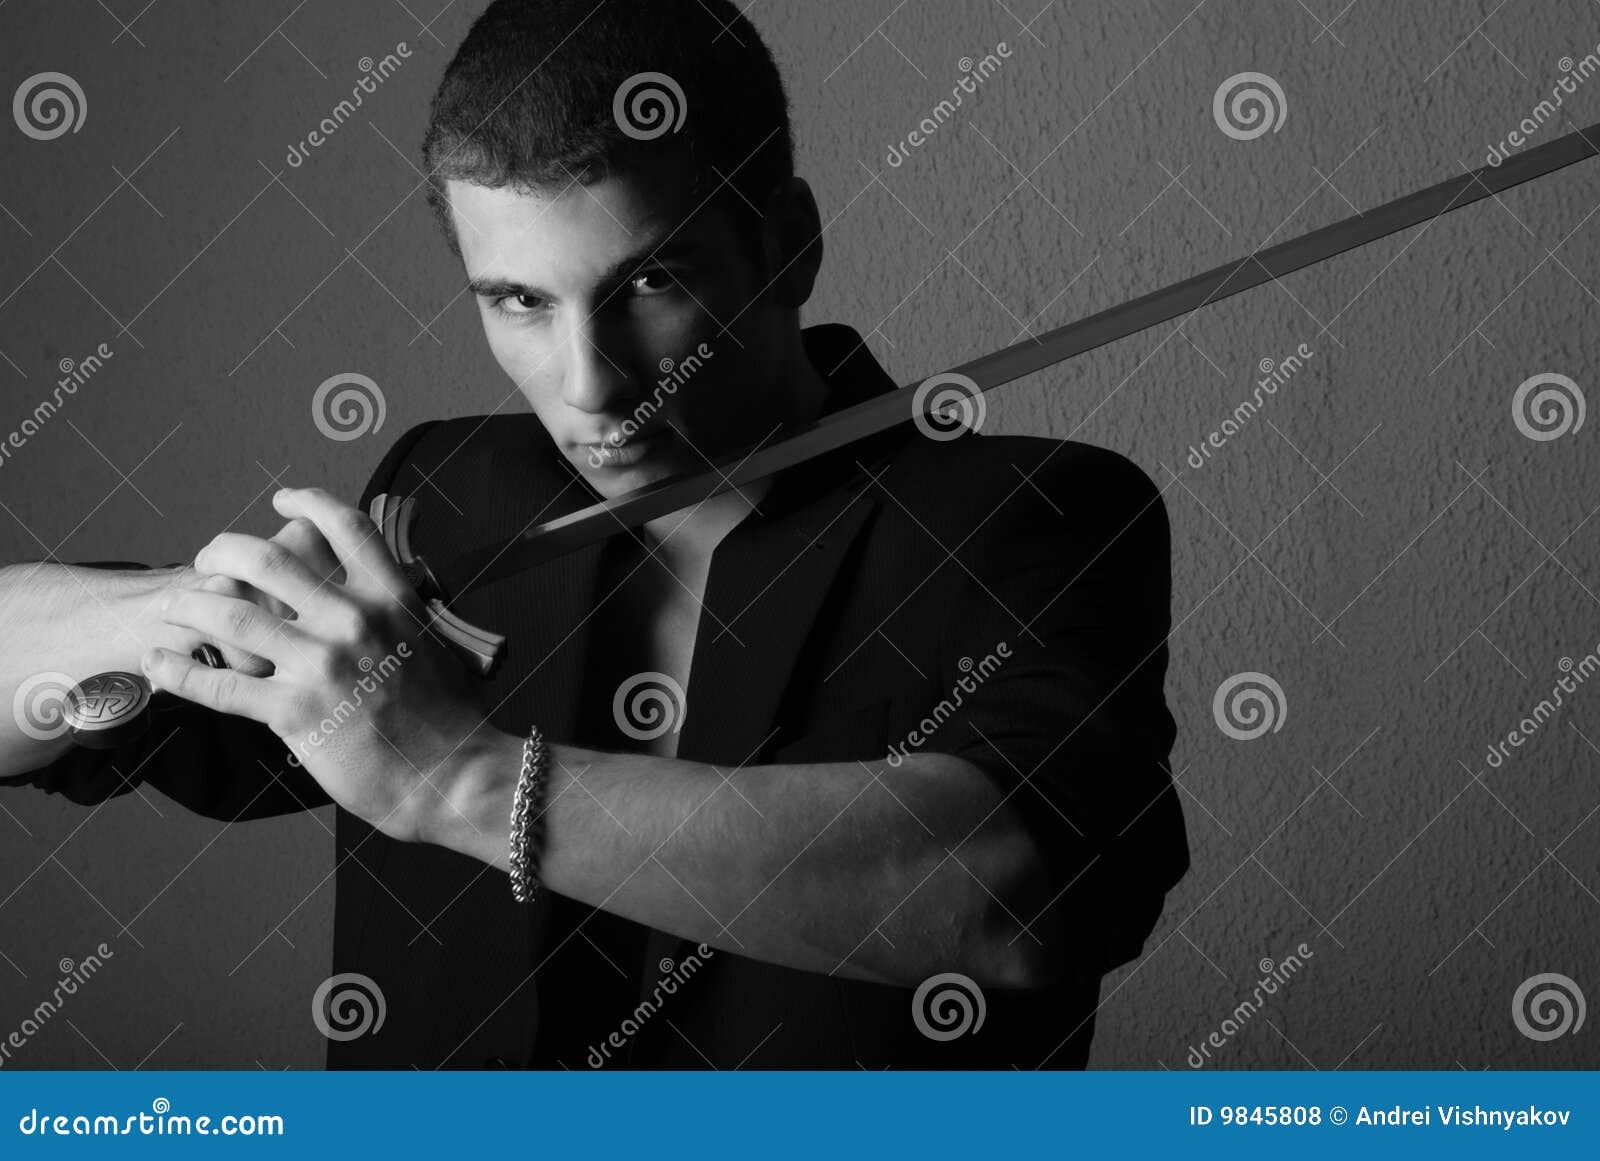 Handsome man with sword stock photo. Image of staring - 9845808